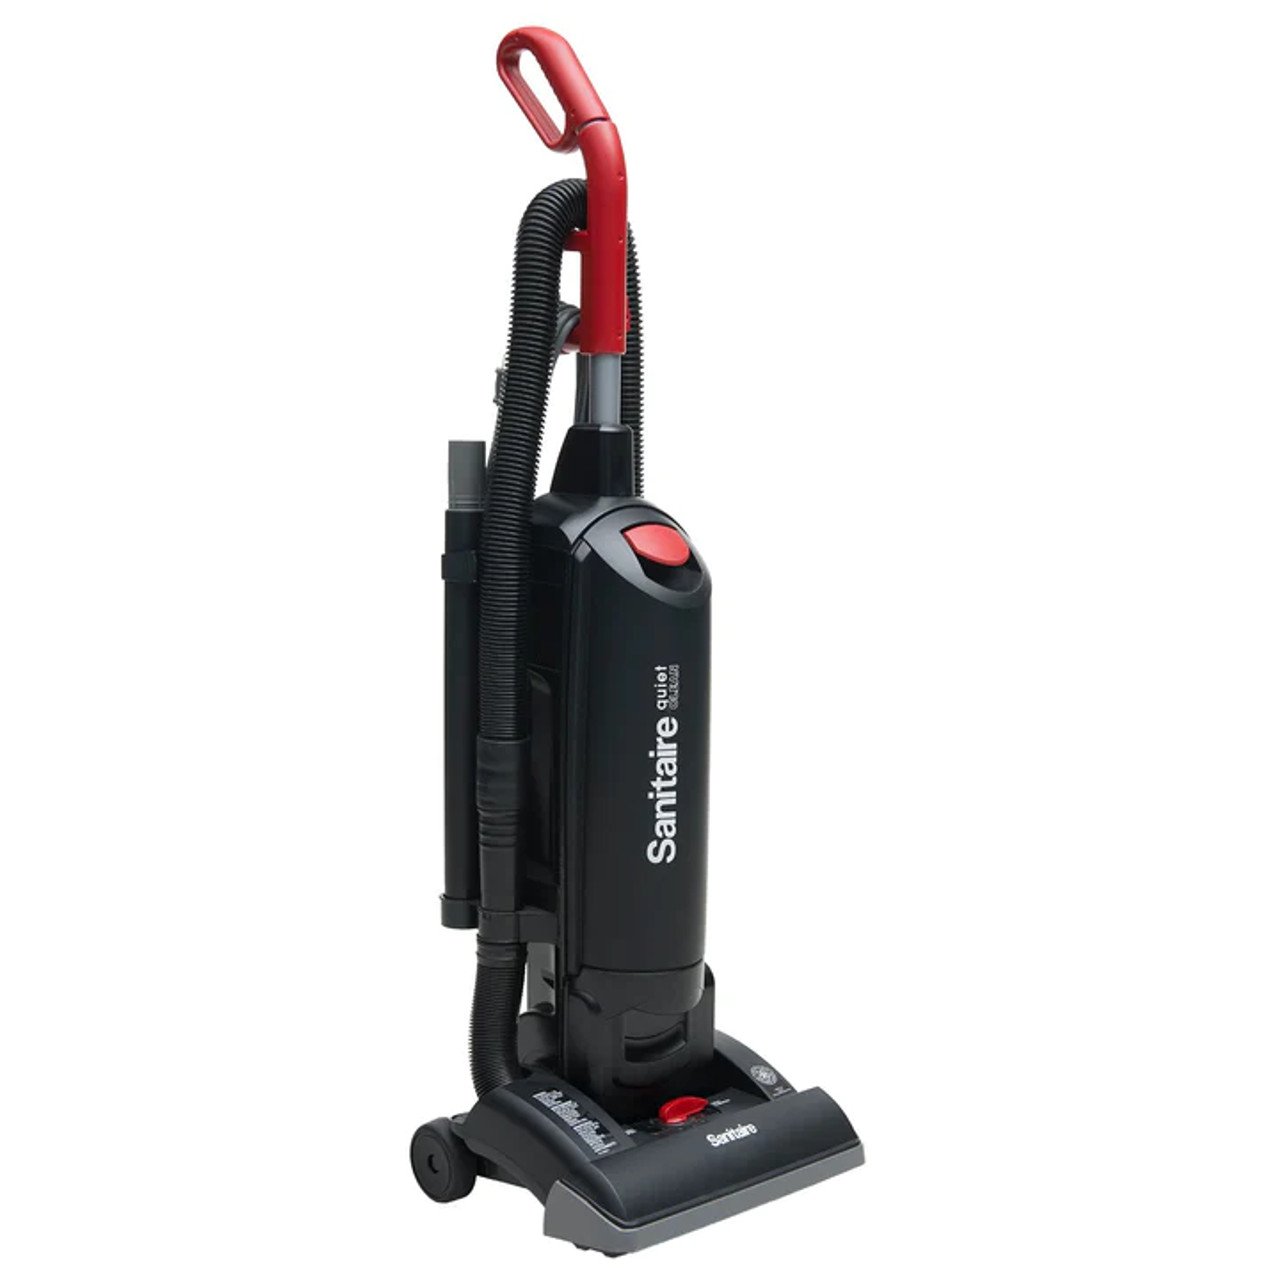 Sanitaire FORCE QuietClean 13" Bagged Upright Vacuum Cleaner | Powerful Cleaning with Quiet Operation